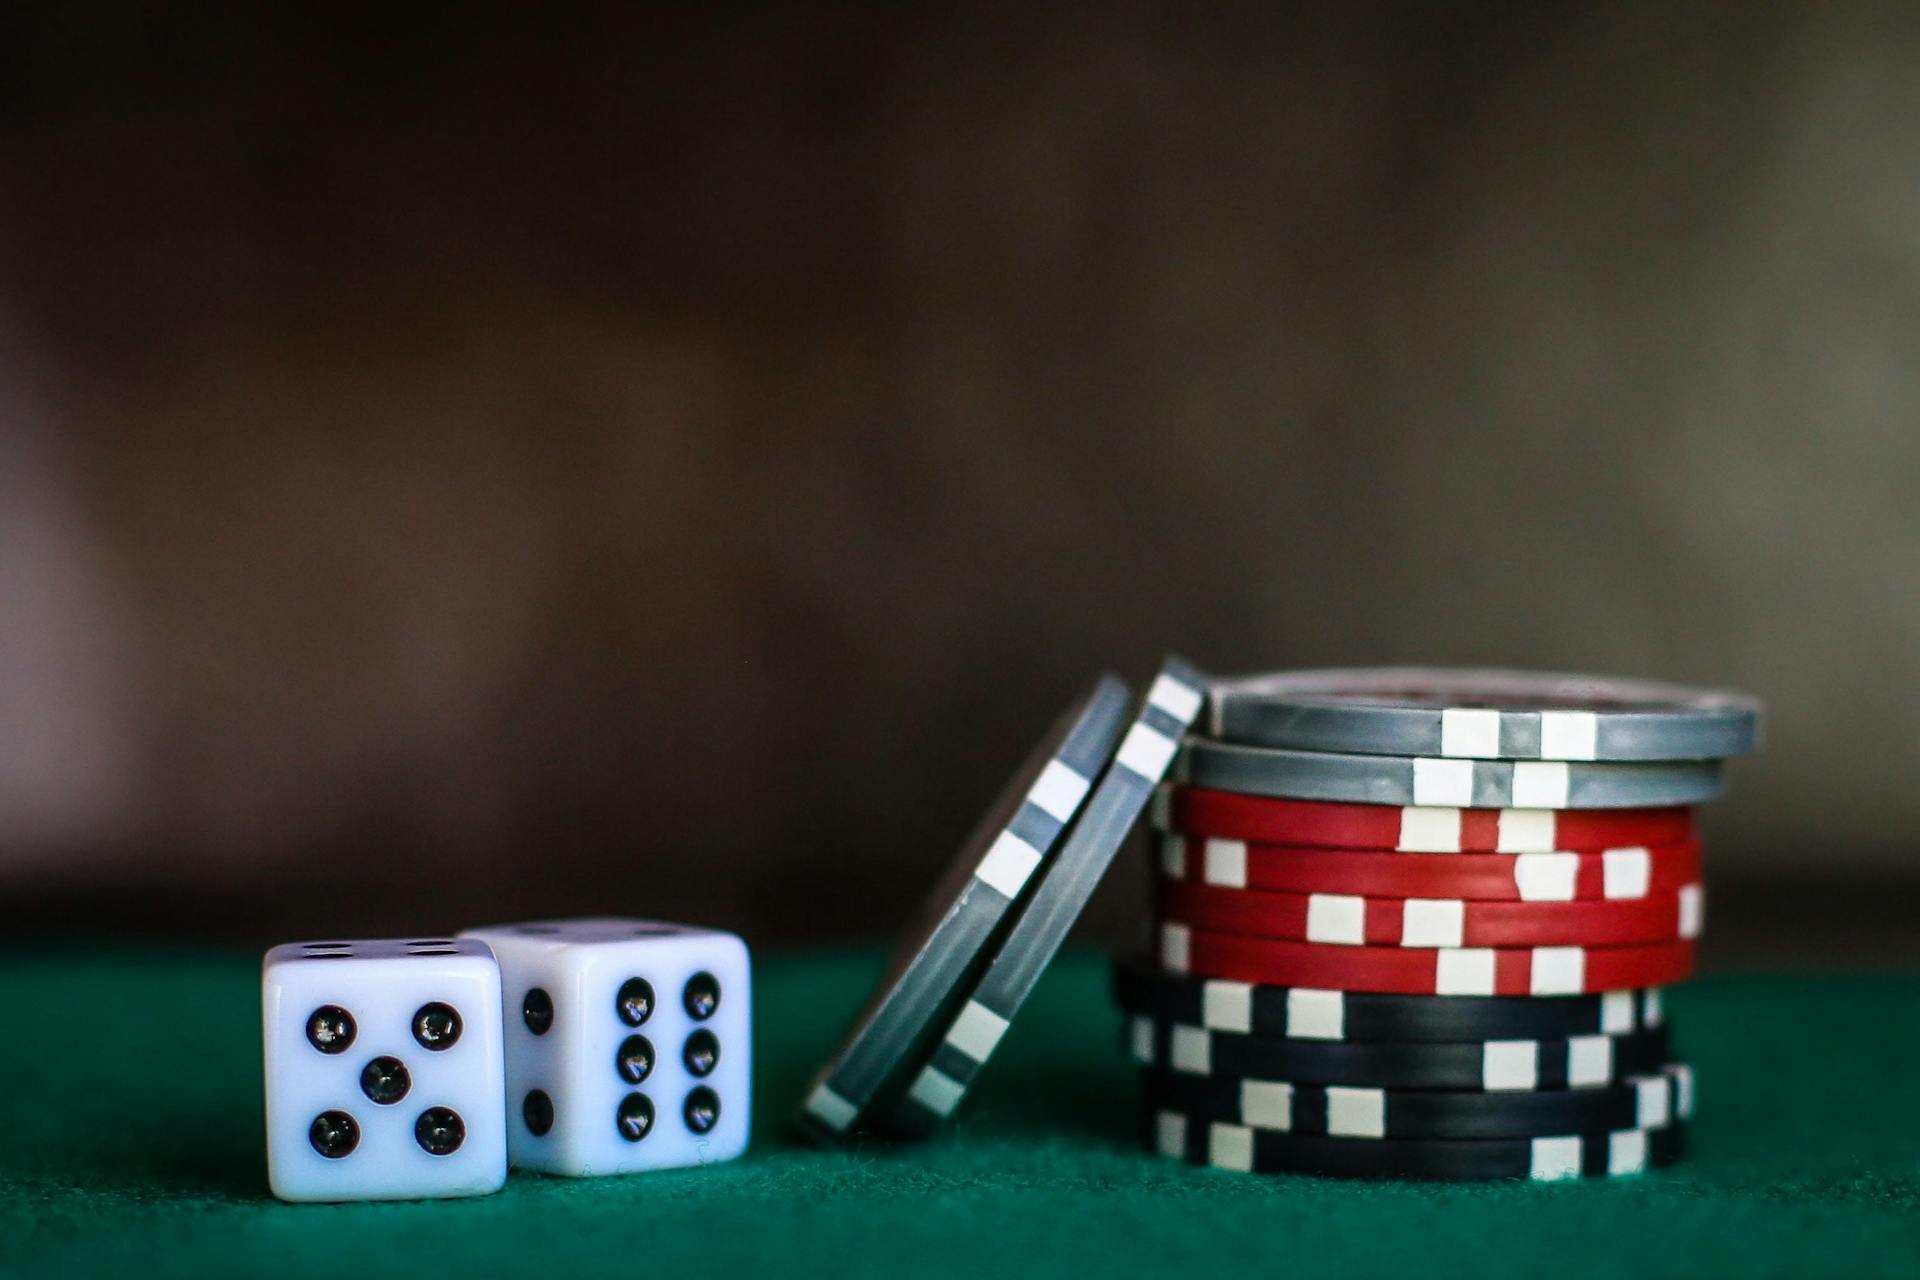 Poker chips and two dice on a poker table